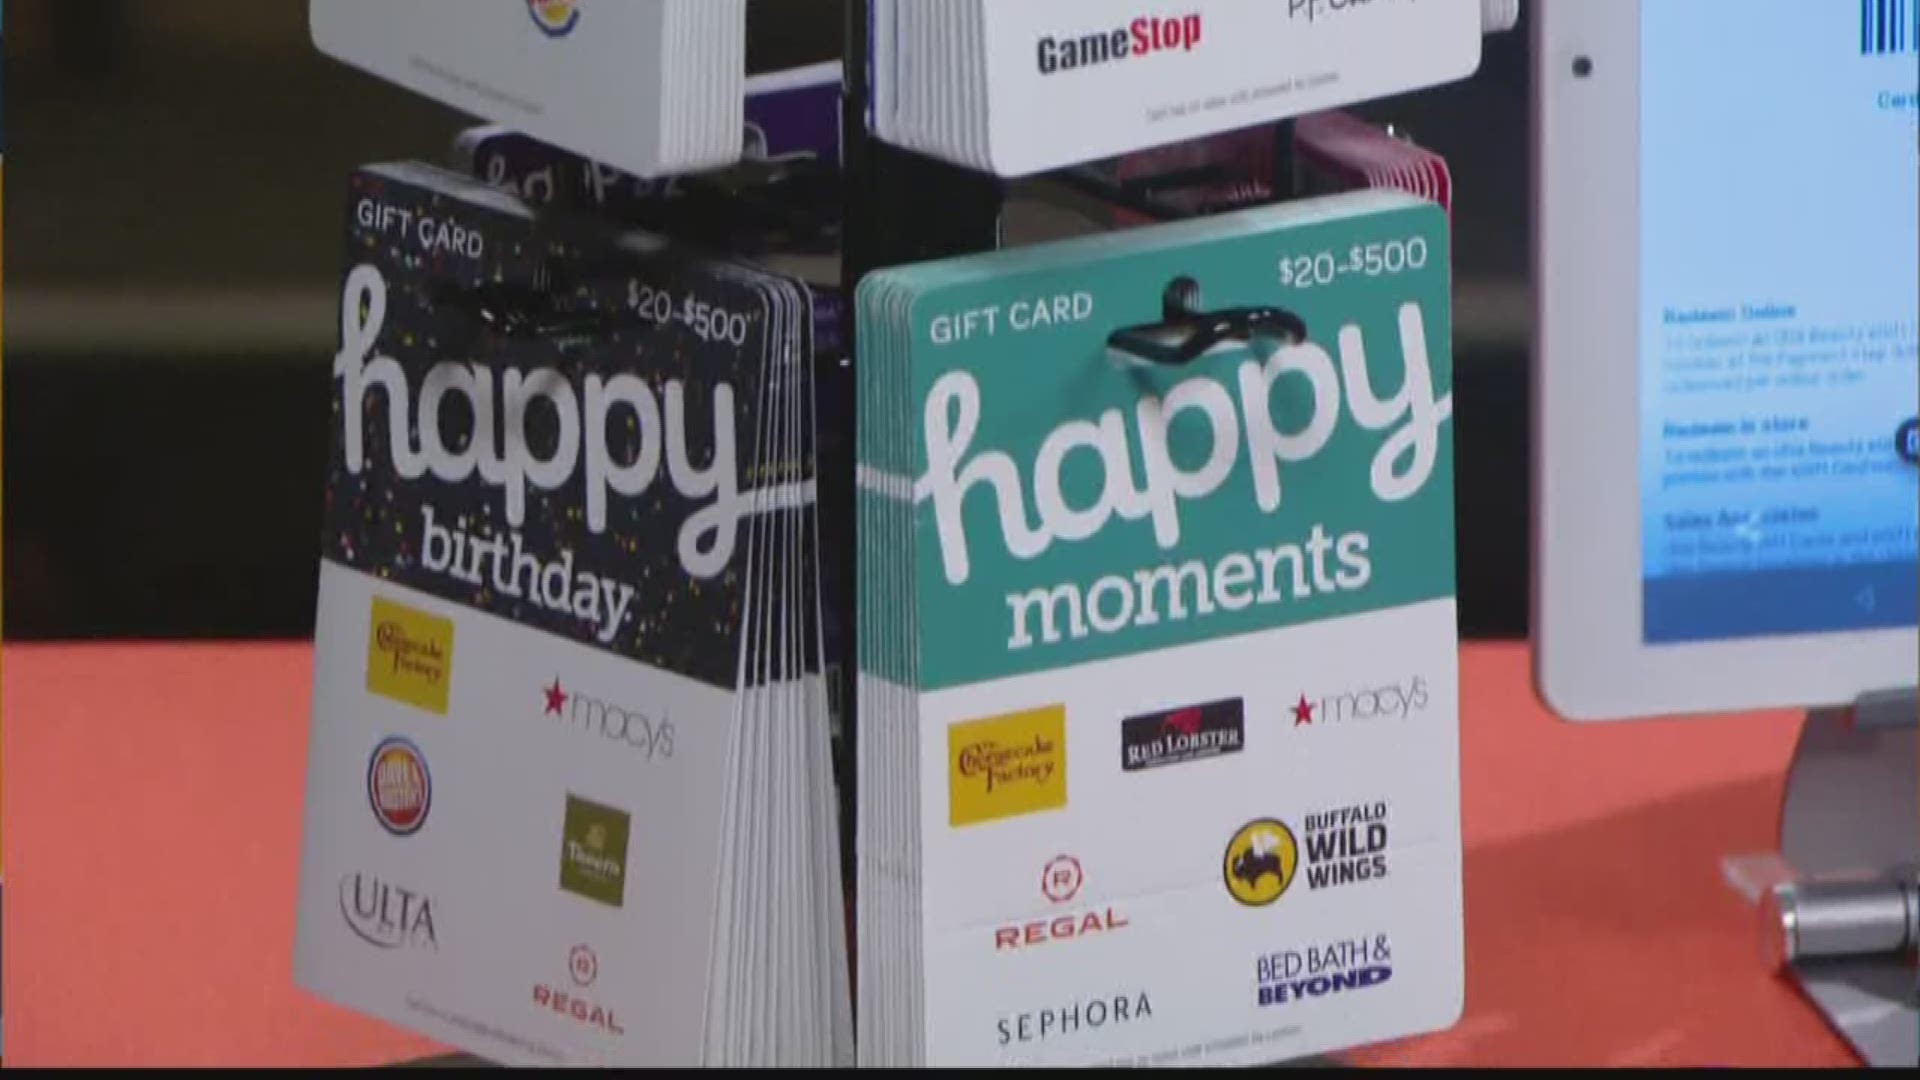 Gift card gifting is growing in popularity.